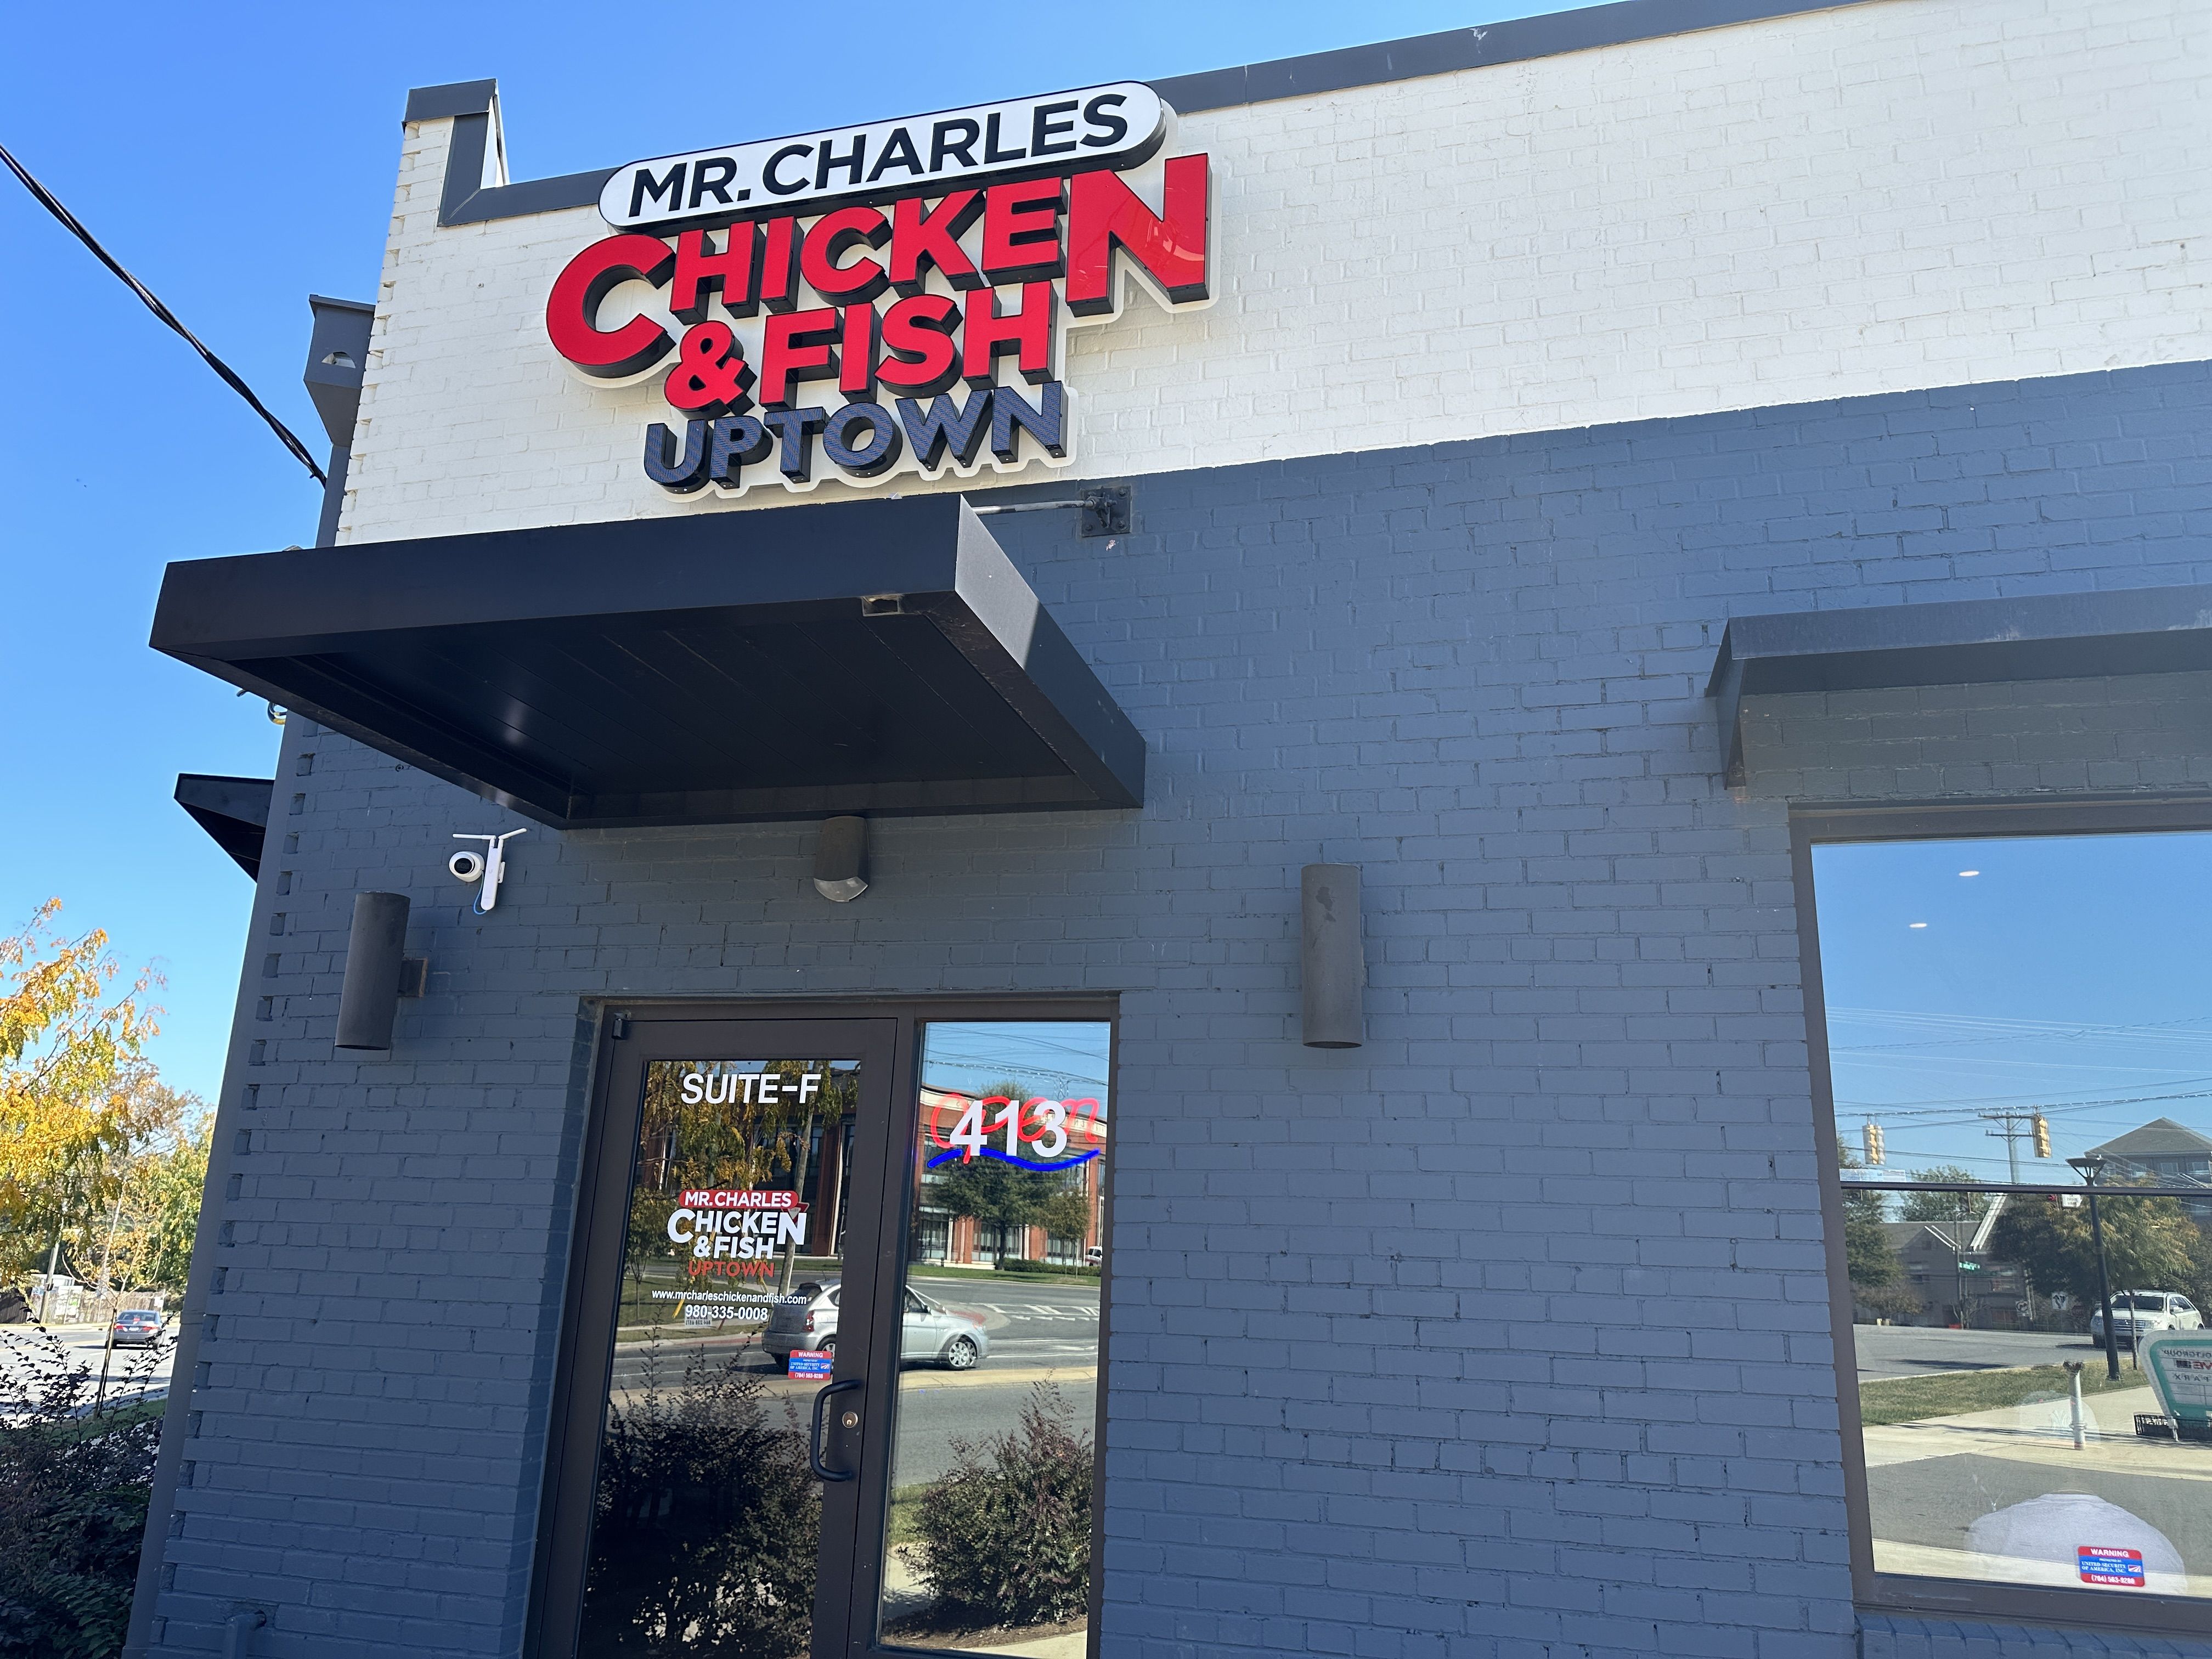 Mr Charles chicken and fish in Charlotte 